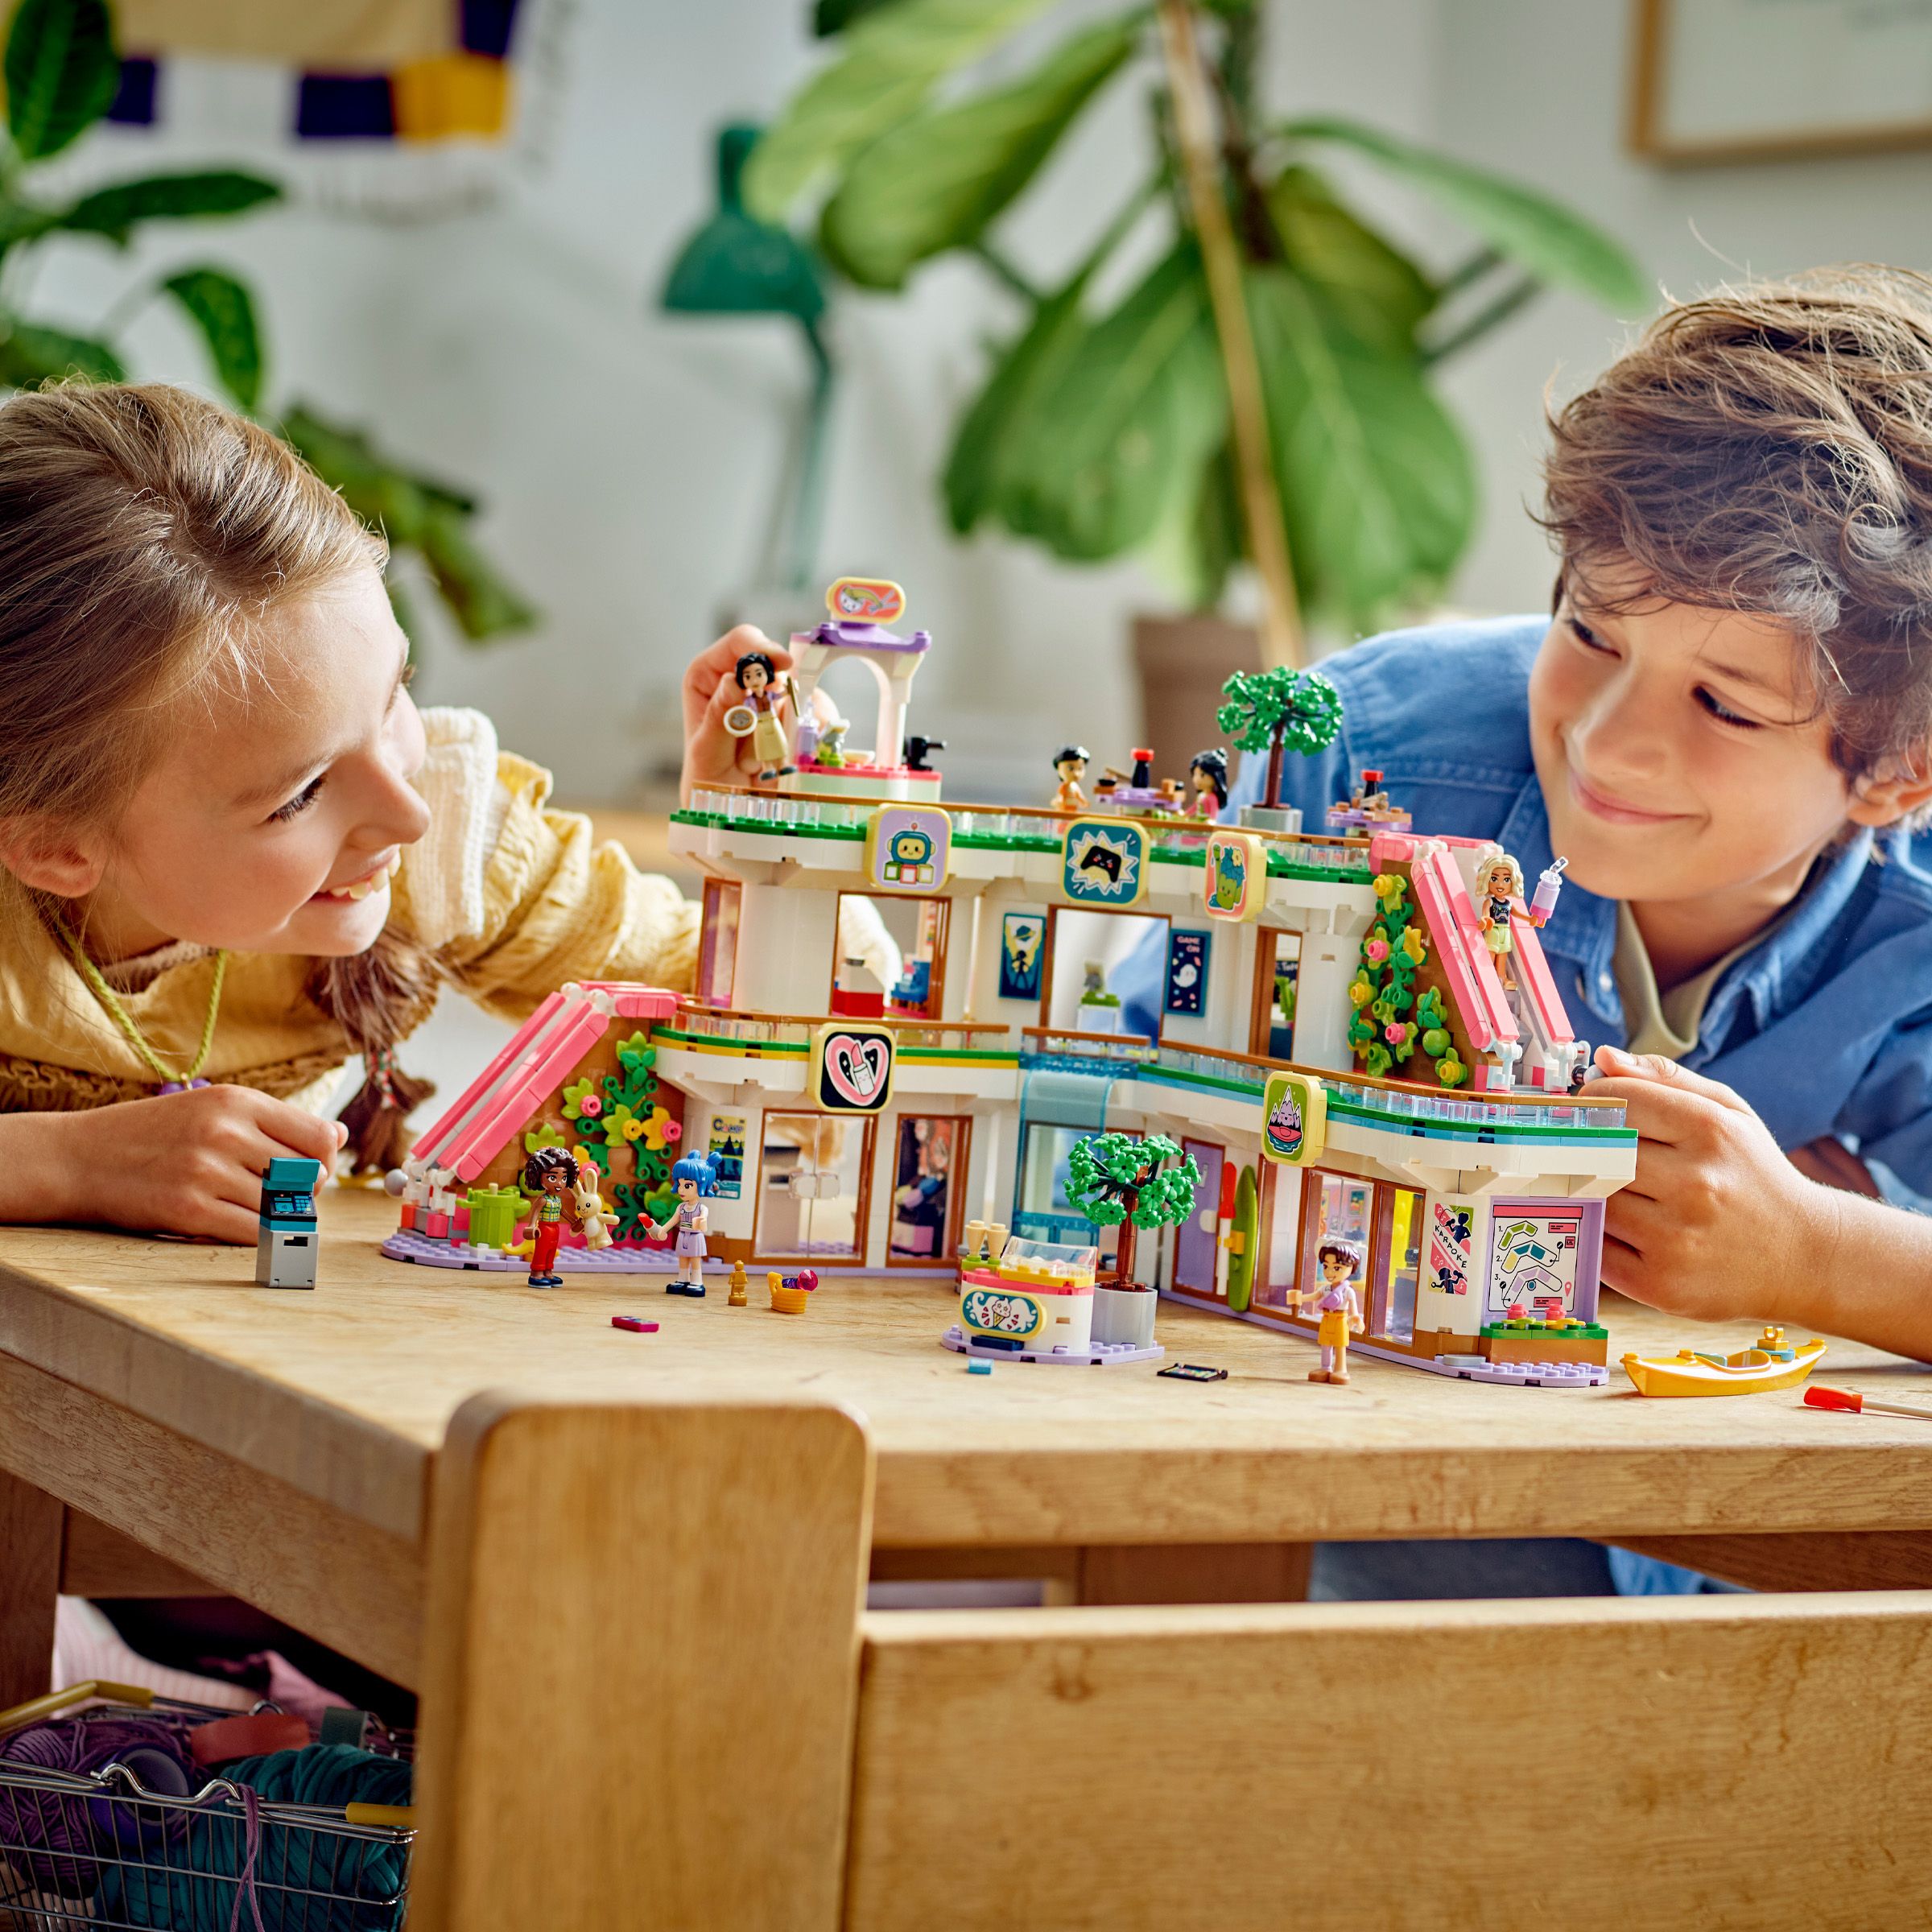 Children playing with Lego Friends set